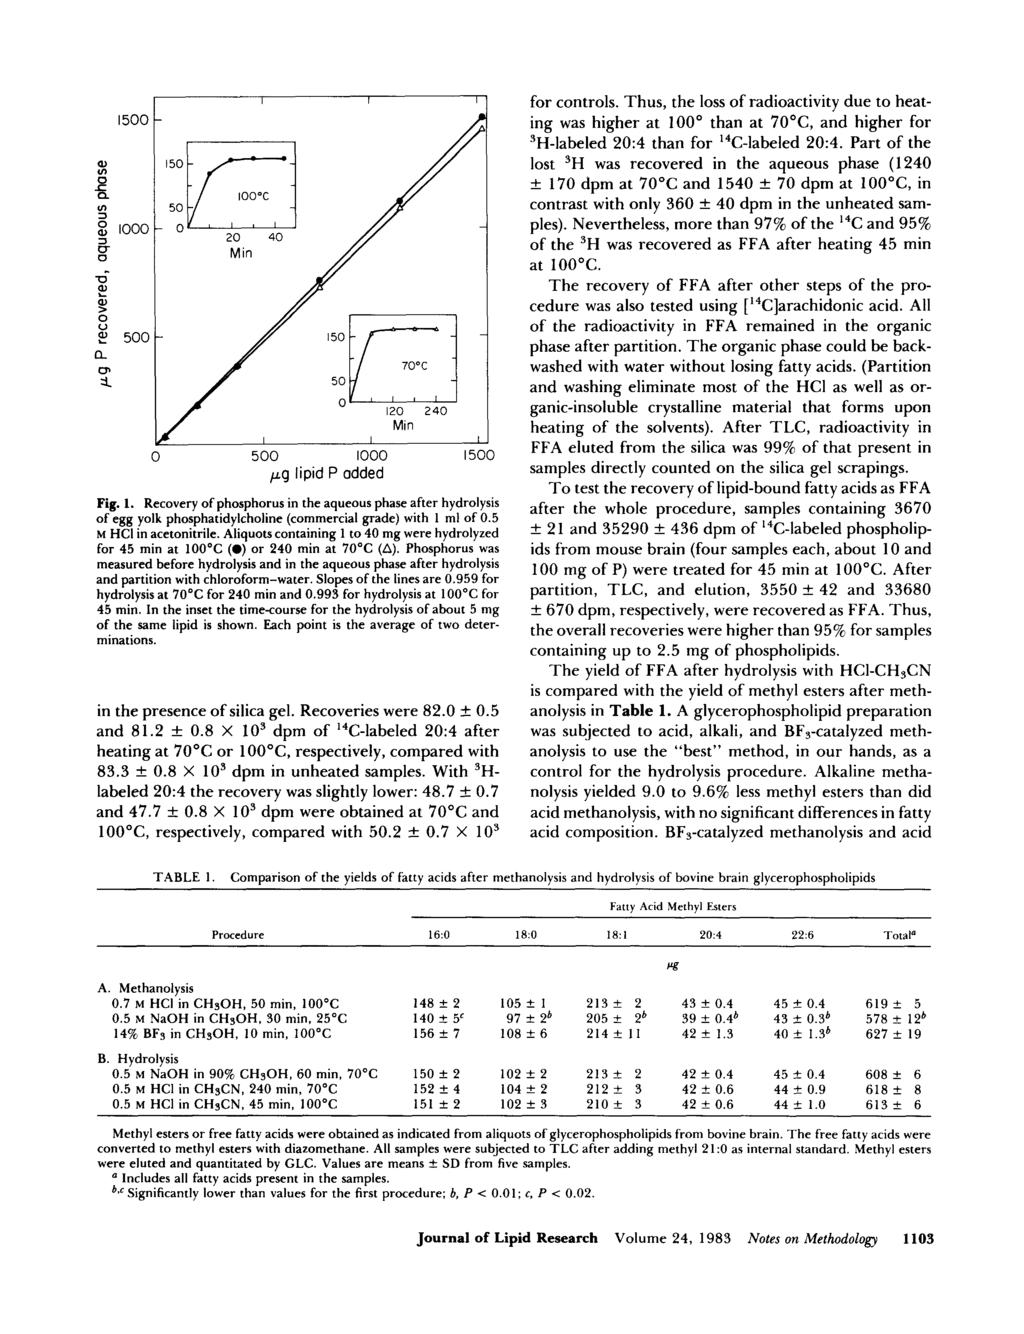 ~ ~~ Q, v) r P v) 3 3 - -?? Q, > V I5 1 2 5 a (5, 5 12 24 Min 5 1 I5 pg lipid P added Fig. 1. Recovery of phosphorus in the aqueous phase after hydrolysis of egg yolk phosphatidylcholine (commercial grade) with 1 ml of.